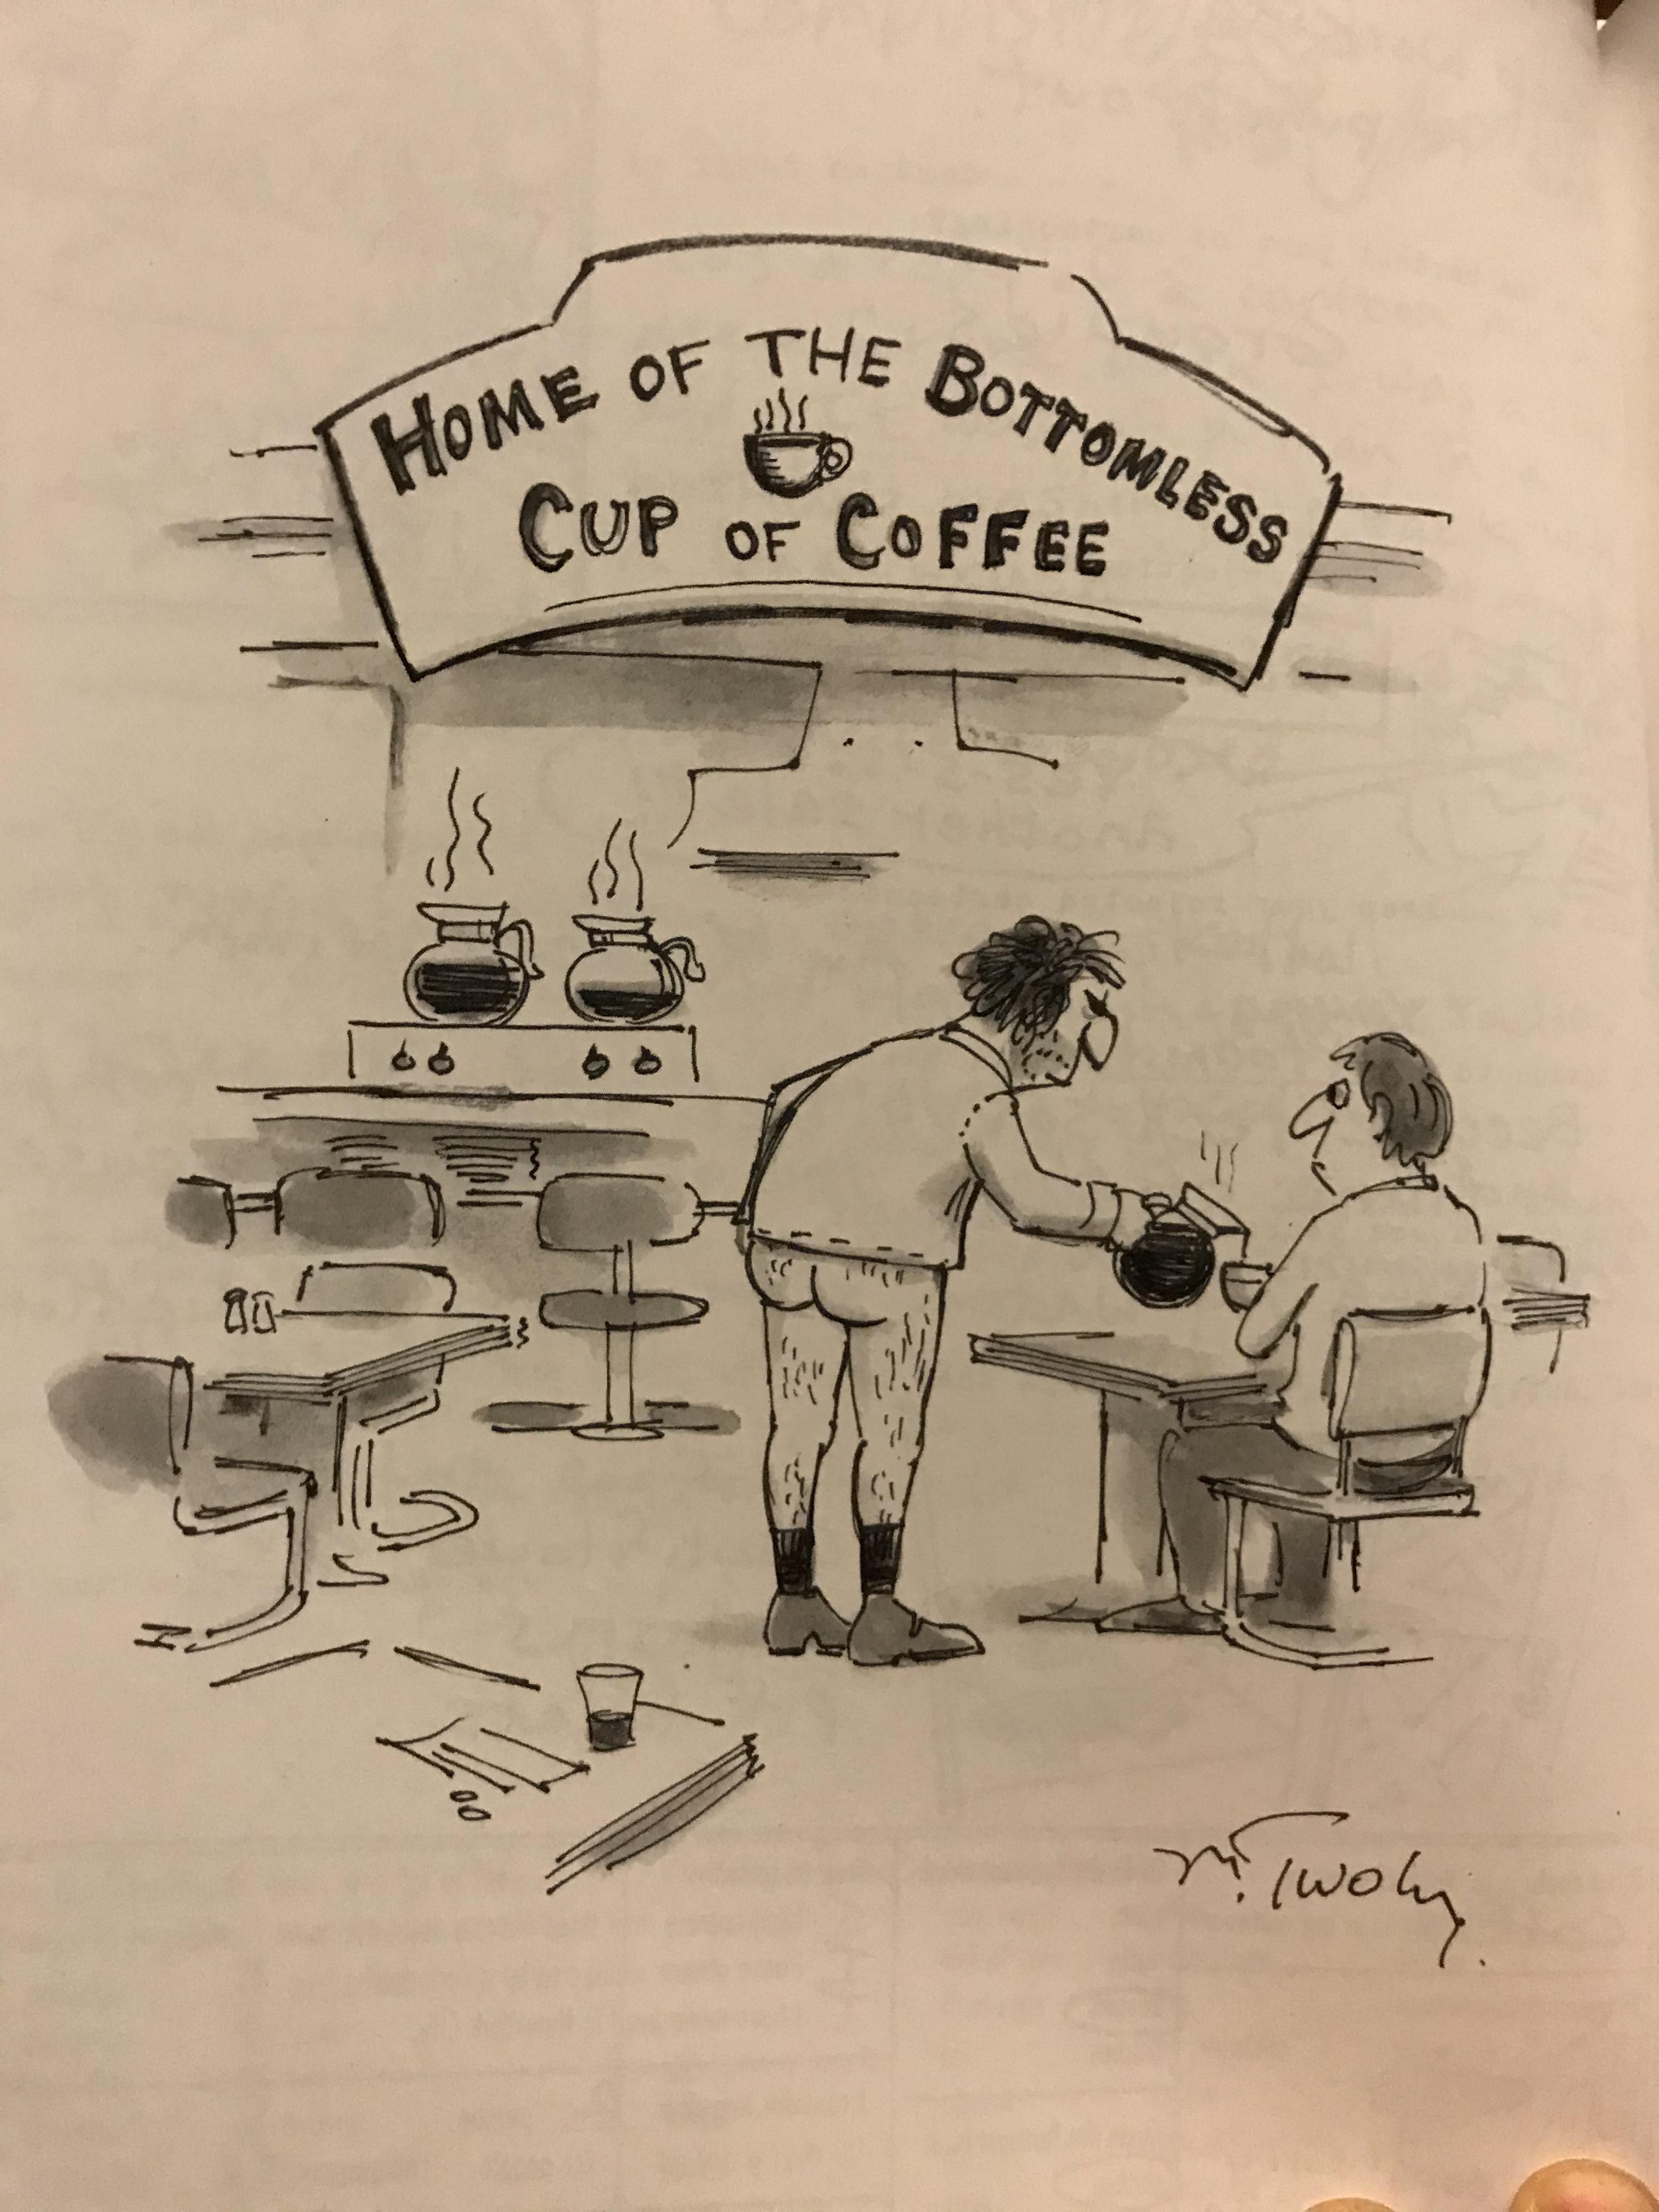 Bottomless cup of coffee